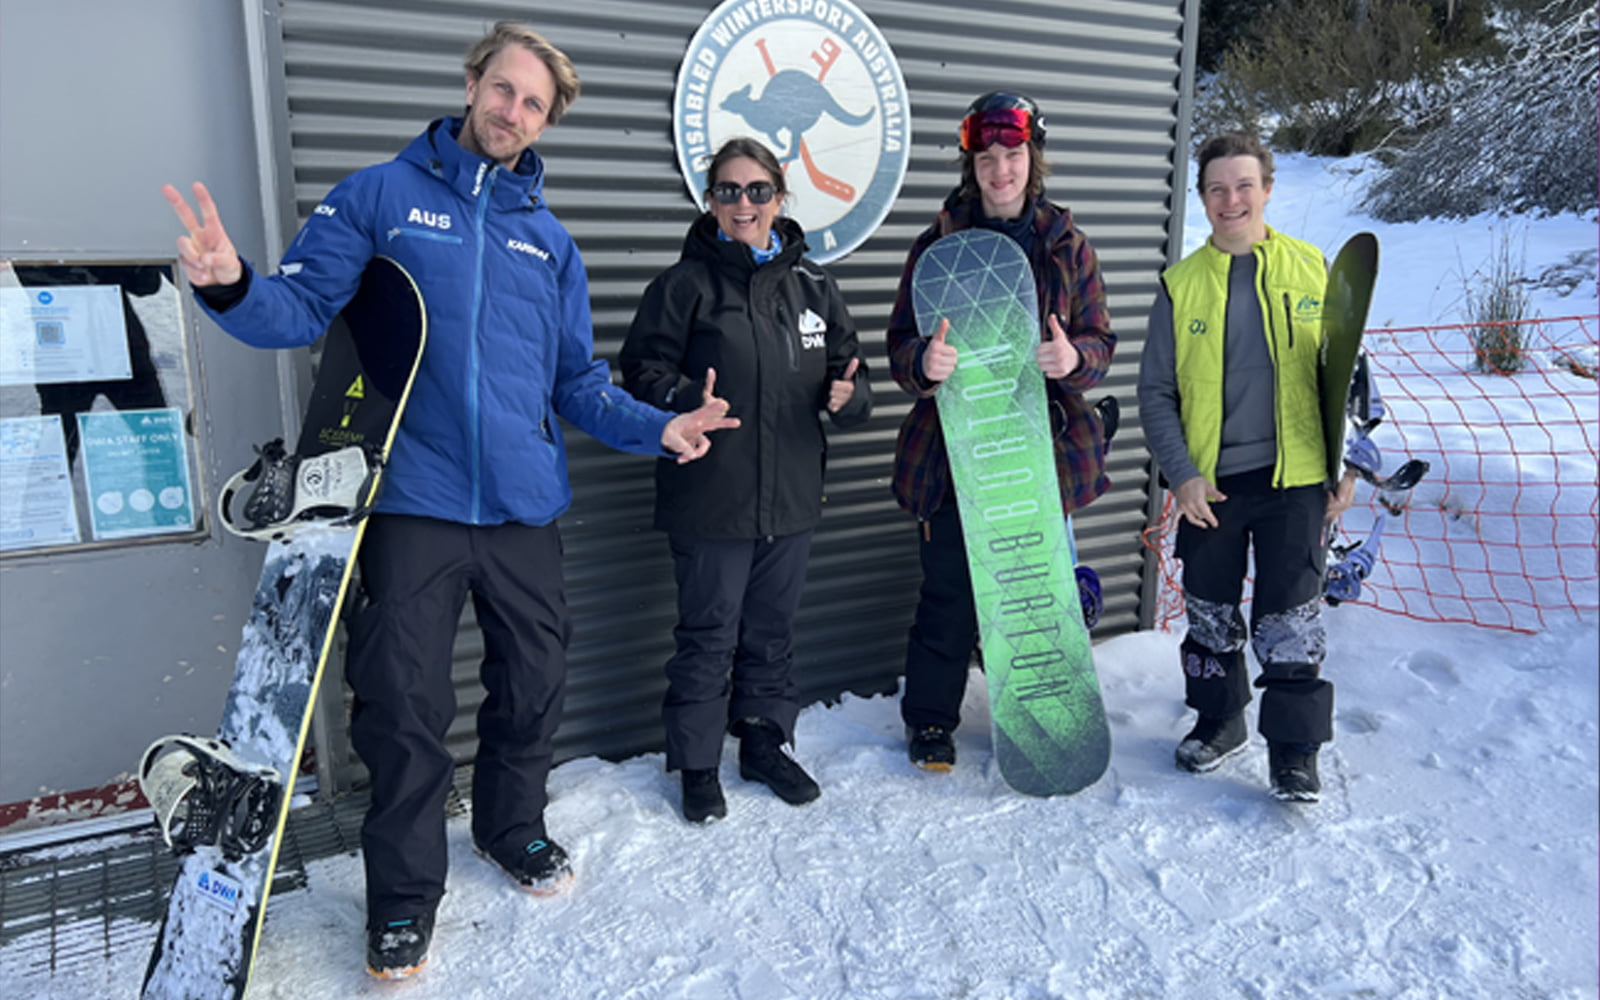 Robinson Scholarship Goes To Young Snowboarder With Big Dreams